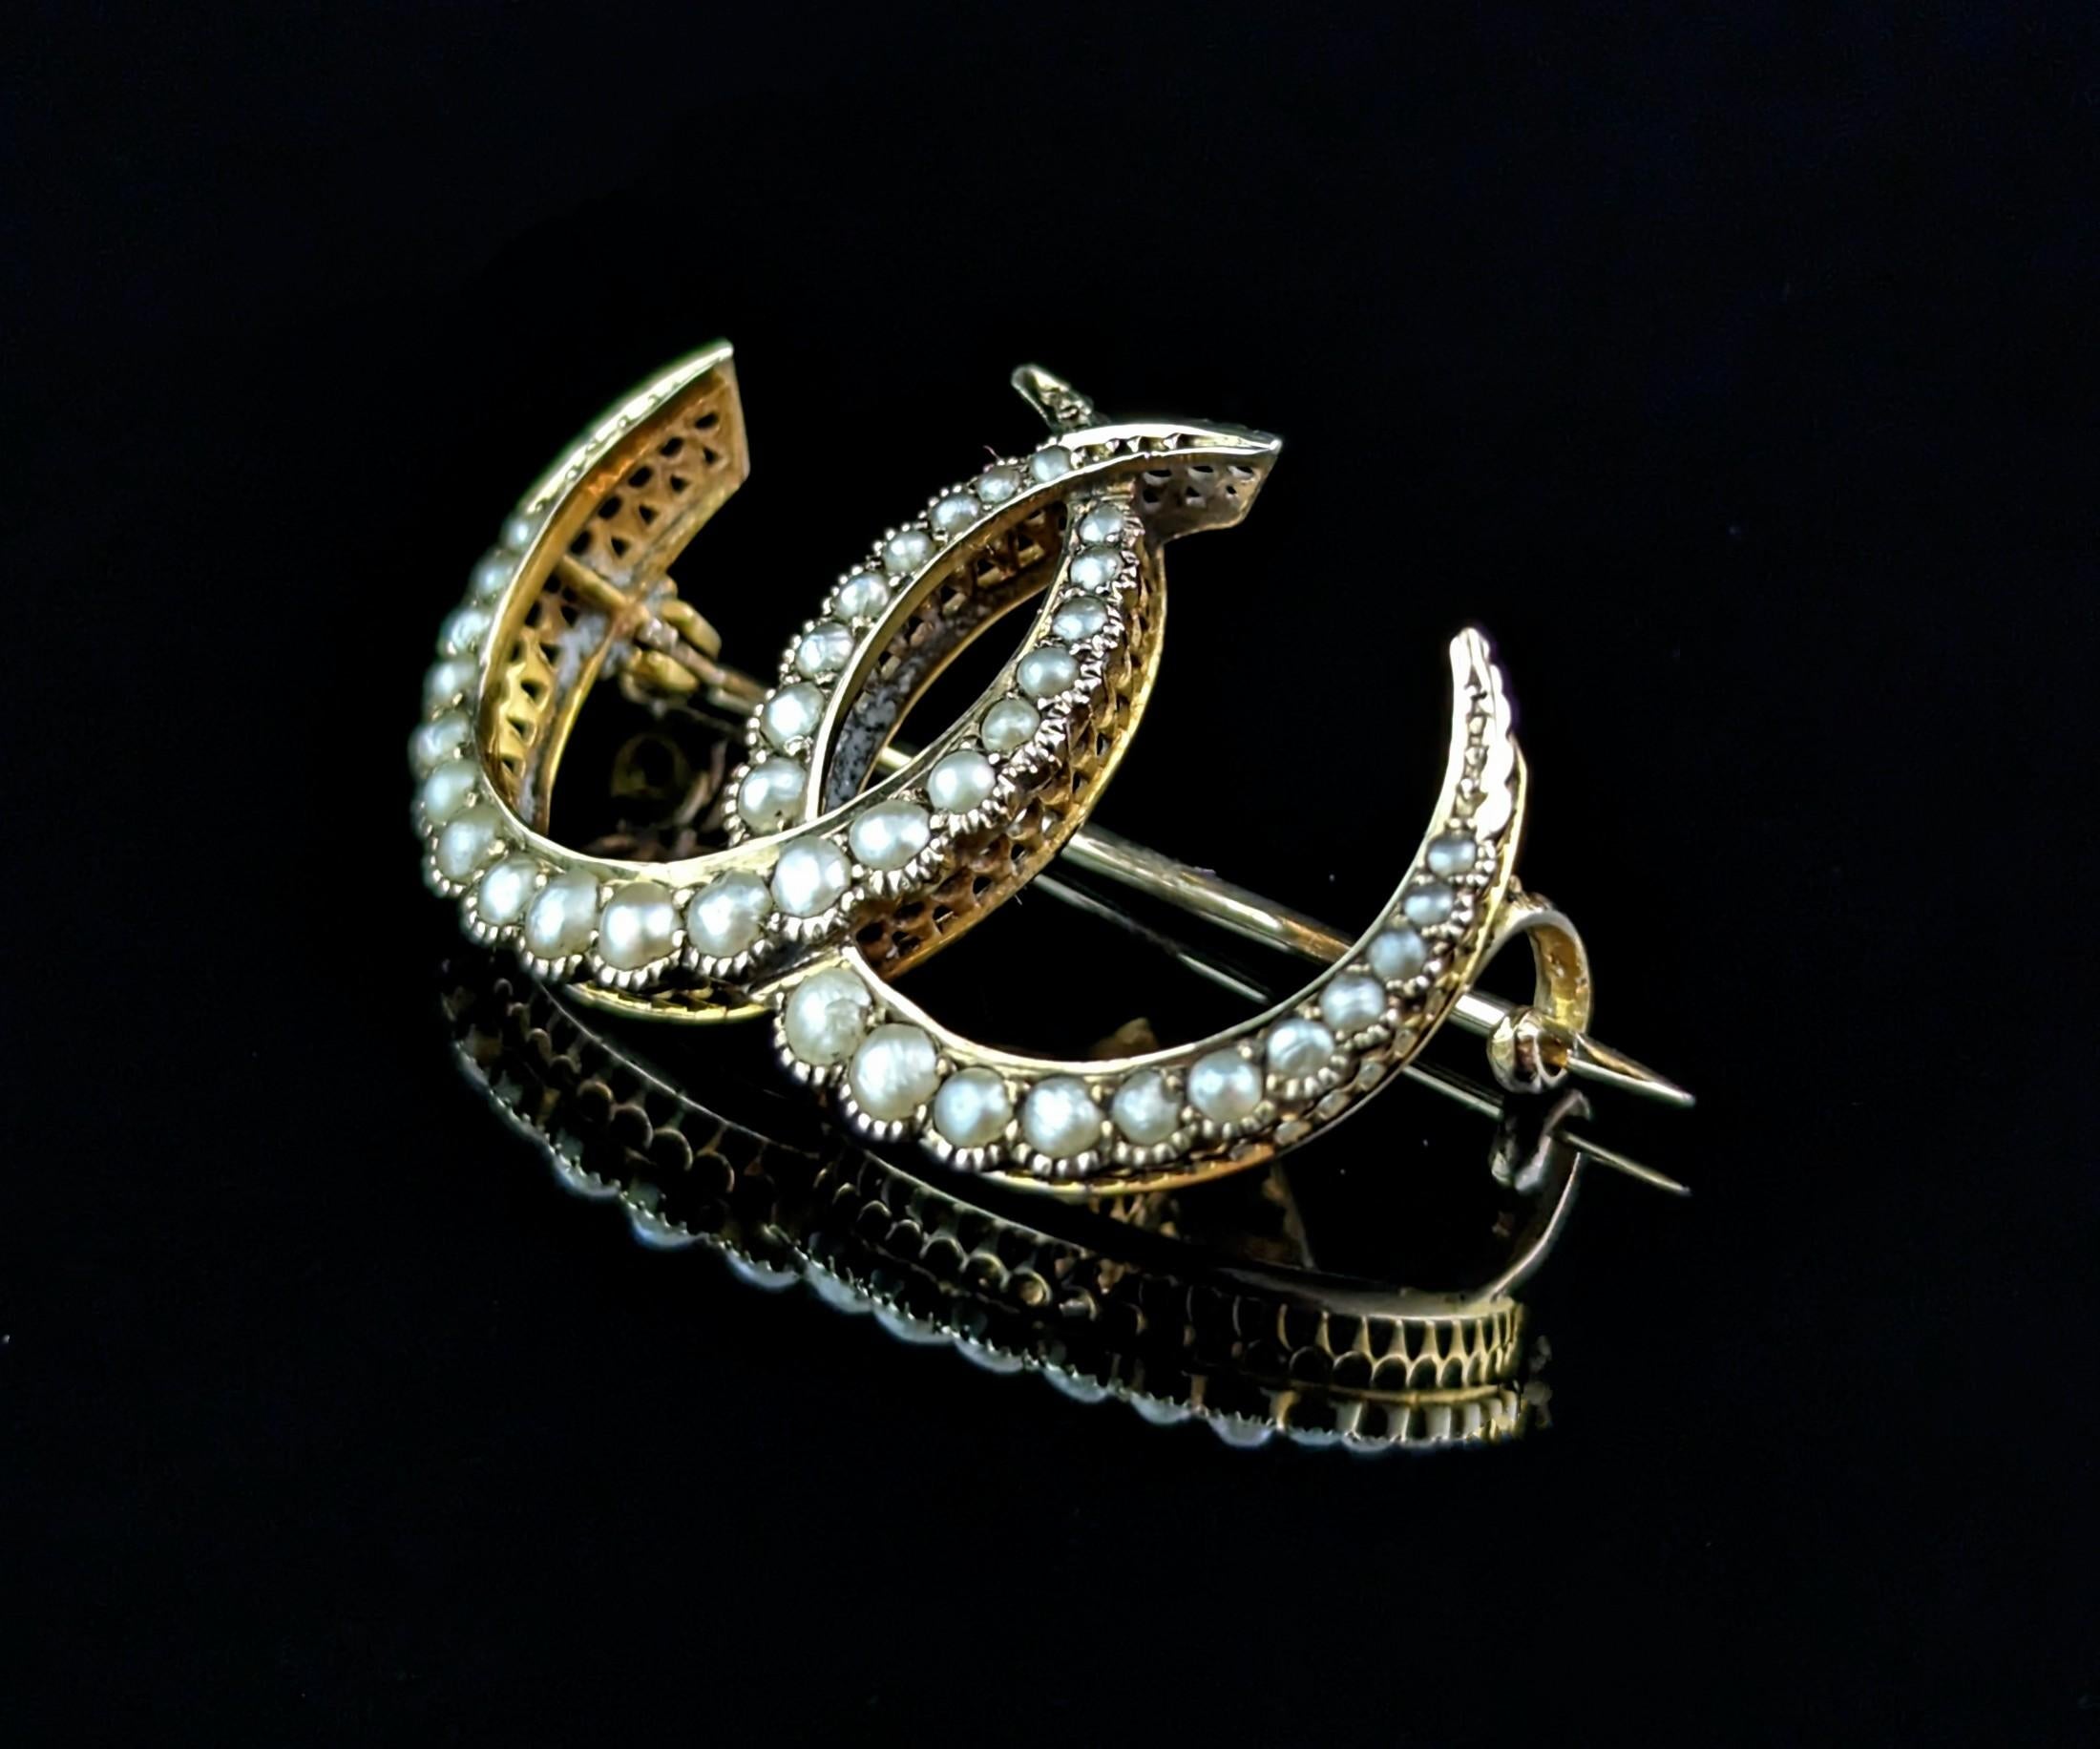 A gorgeous antique, late Victorian, 9ct gold and pearl double crescent brooch.

Beautiful closed crescents in 9ct yellow gold, set with creamy pearls that graduate from the ends to centre.

Crescent moons were a popular motif in Victorian jewellery,